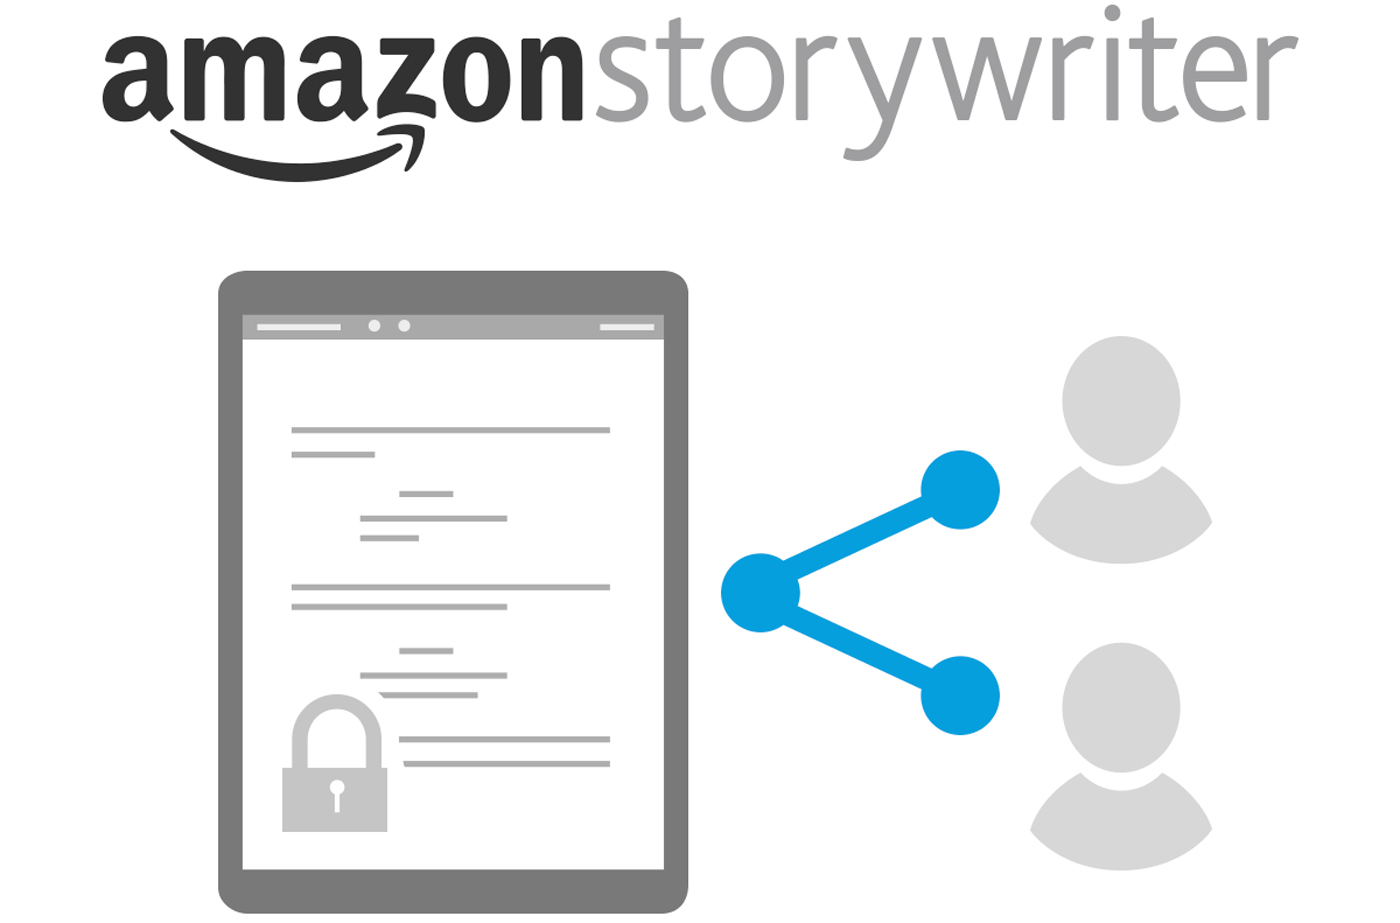 Amazon&#039;s screenwriting tool lets you easily share scripts